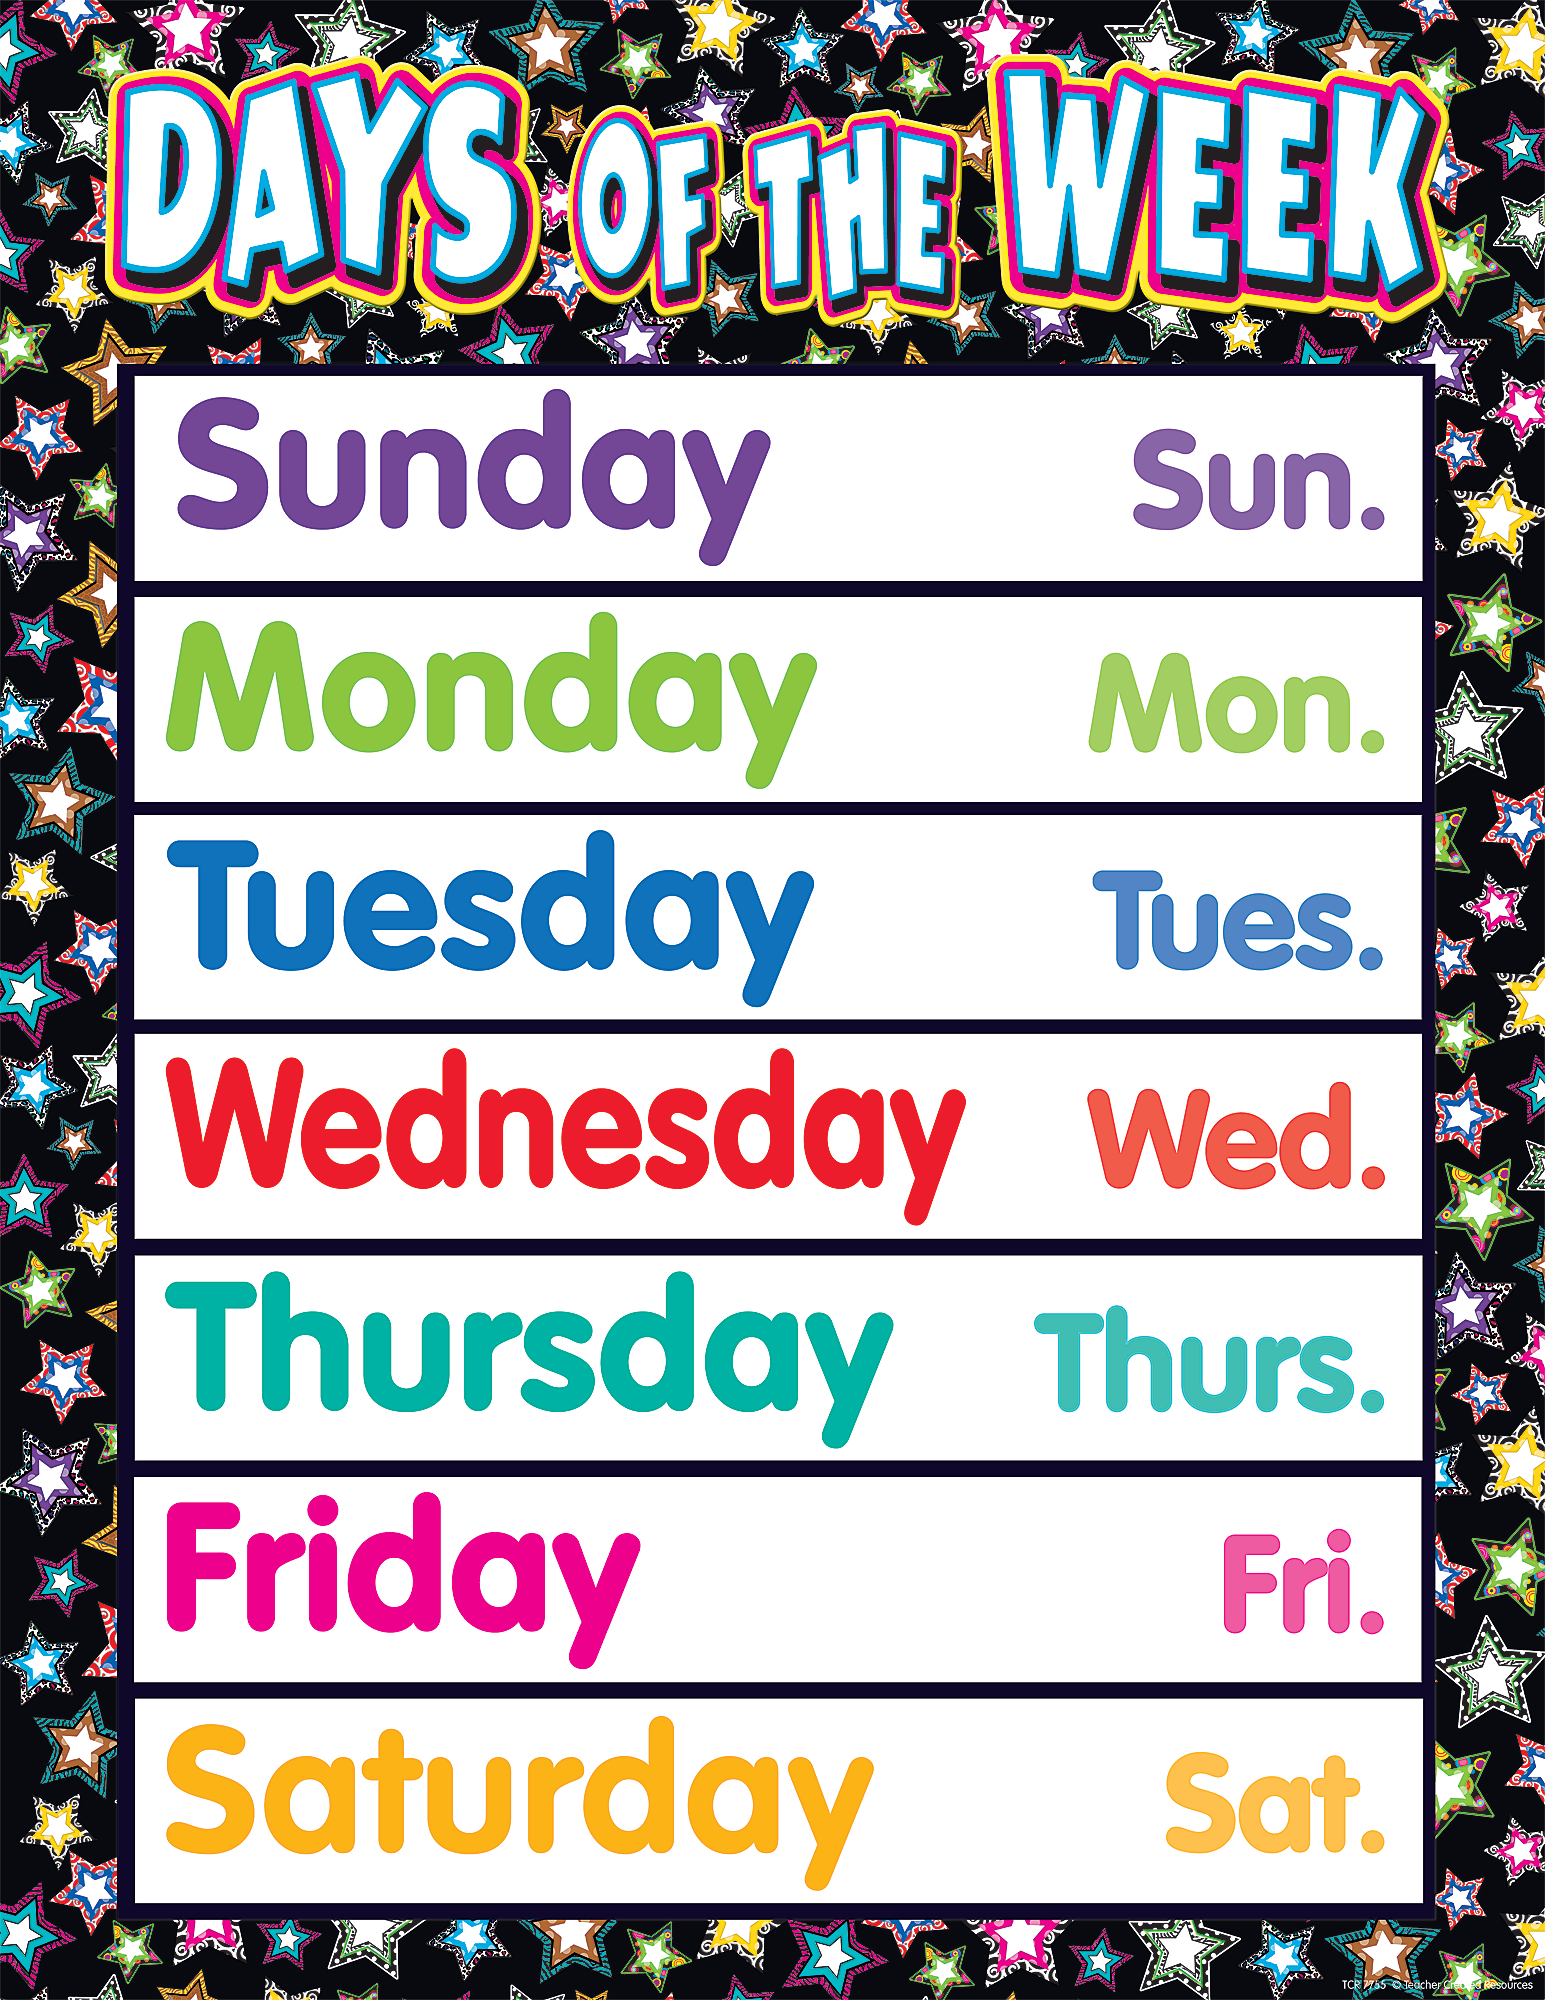 days-of-the-week-chart-pdf-home-responsibilities-chart-printable